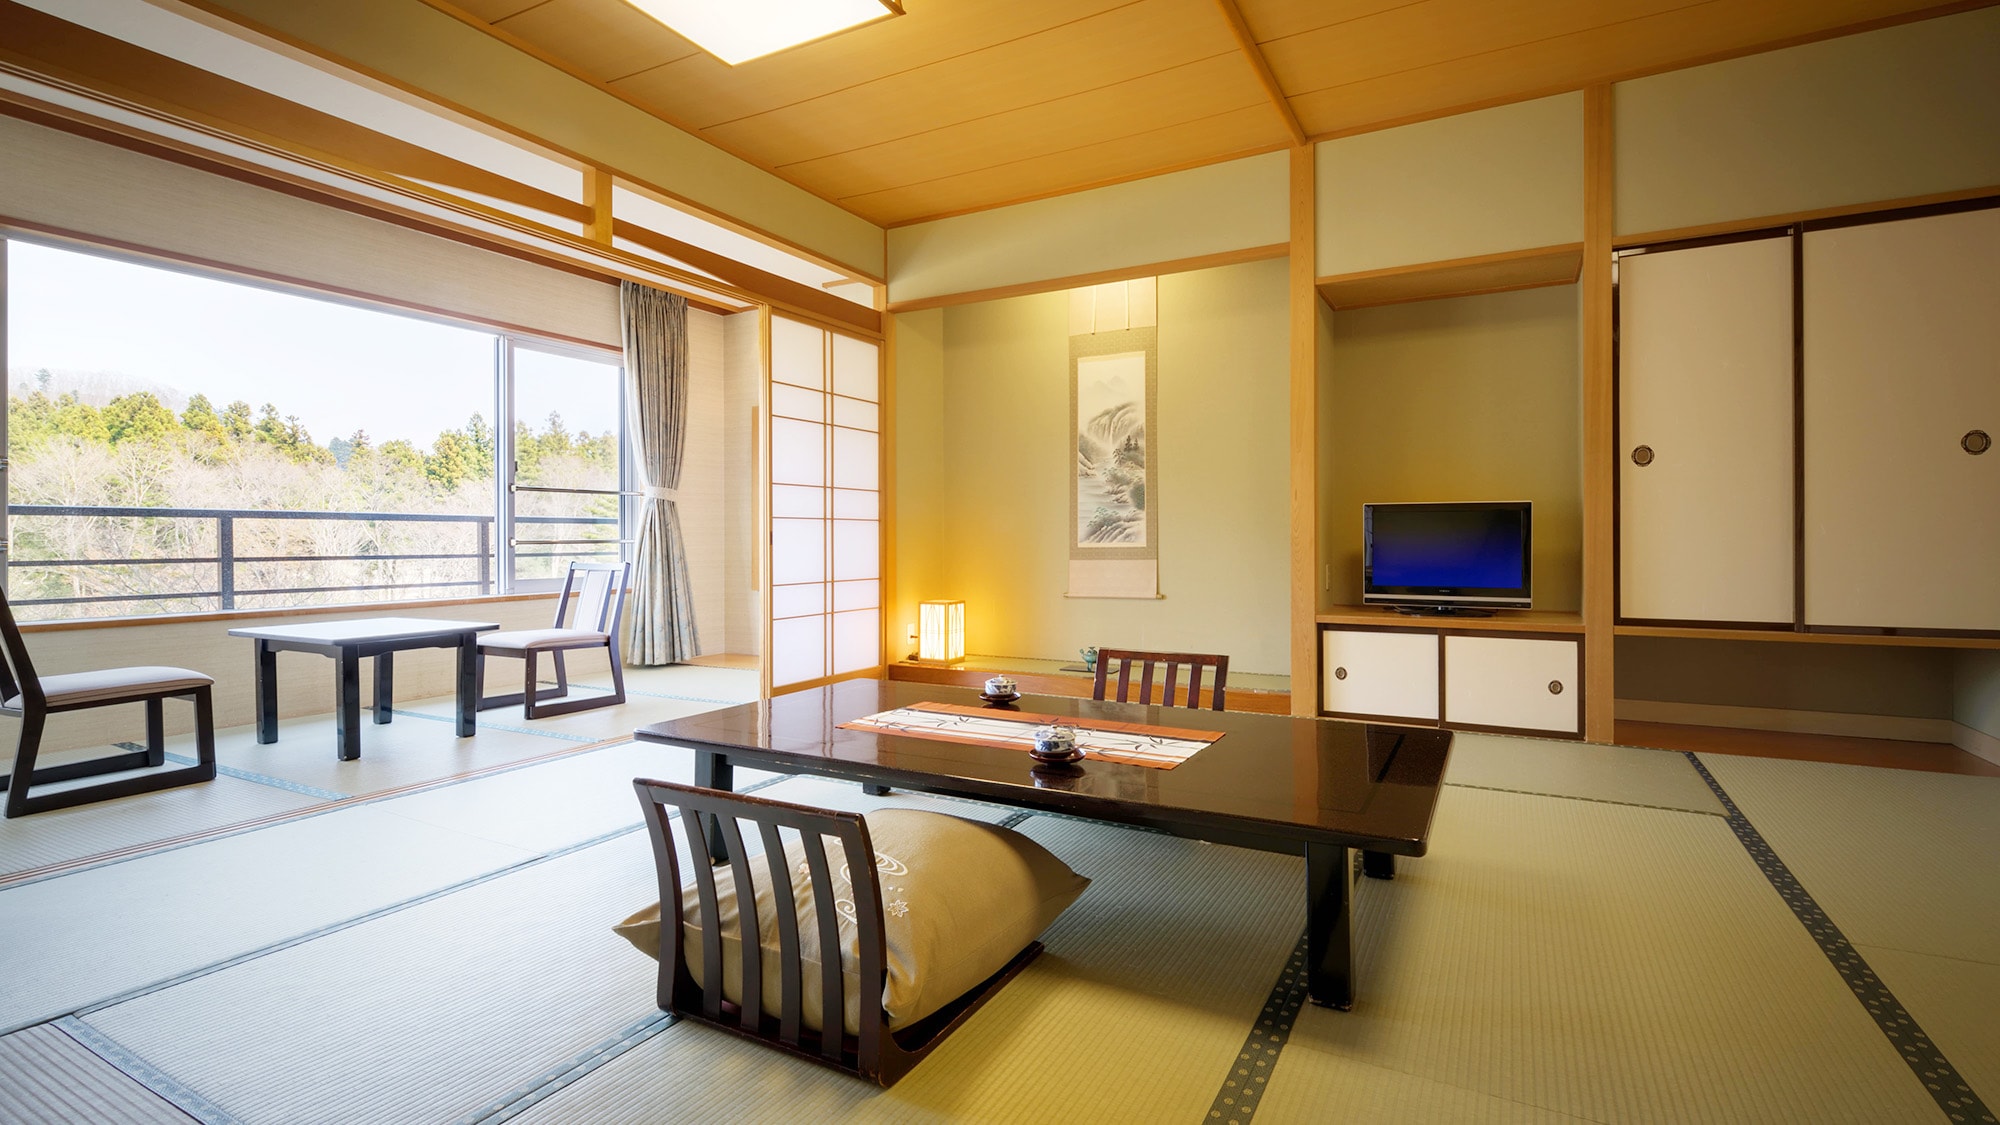 An example of a Japanese-style room [non-smoking]... You can relax with your family. All rooms are non-smoking rooms.